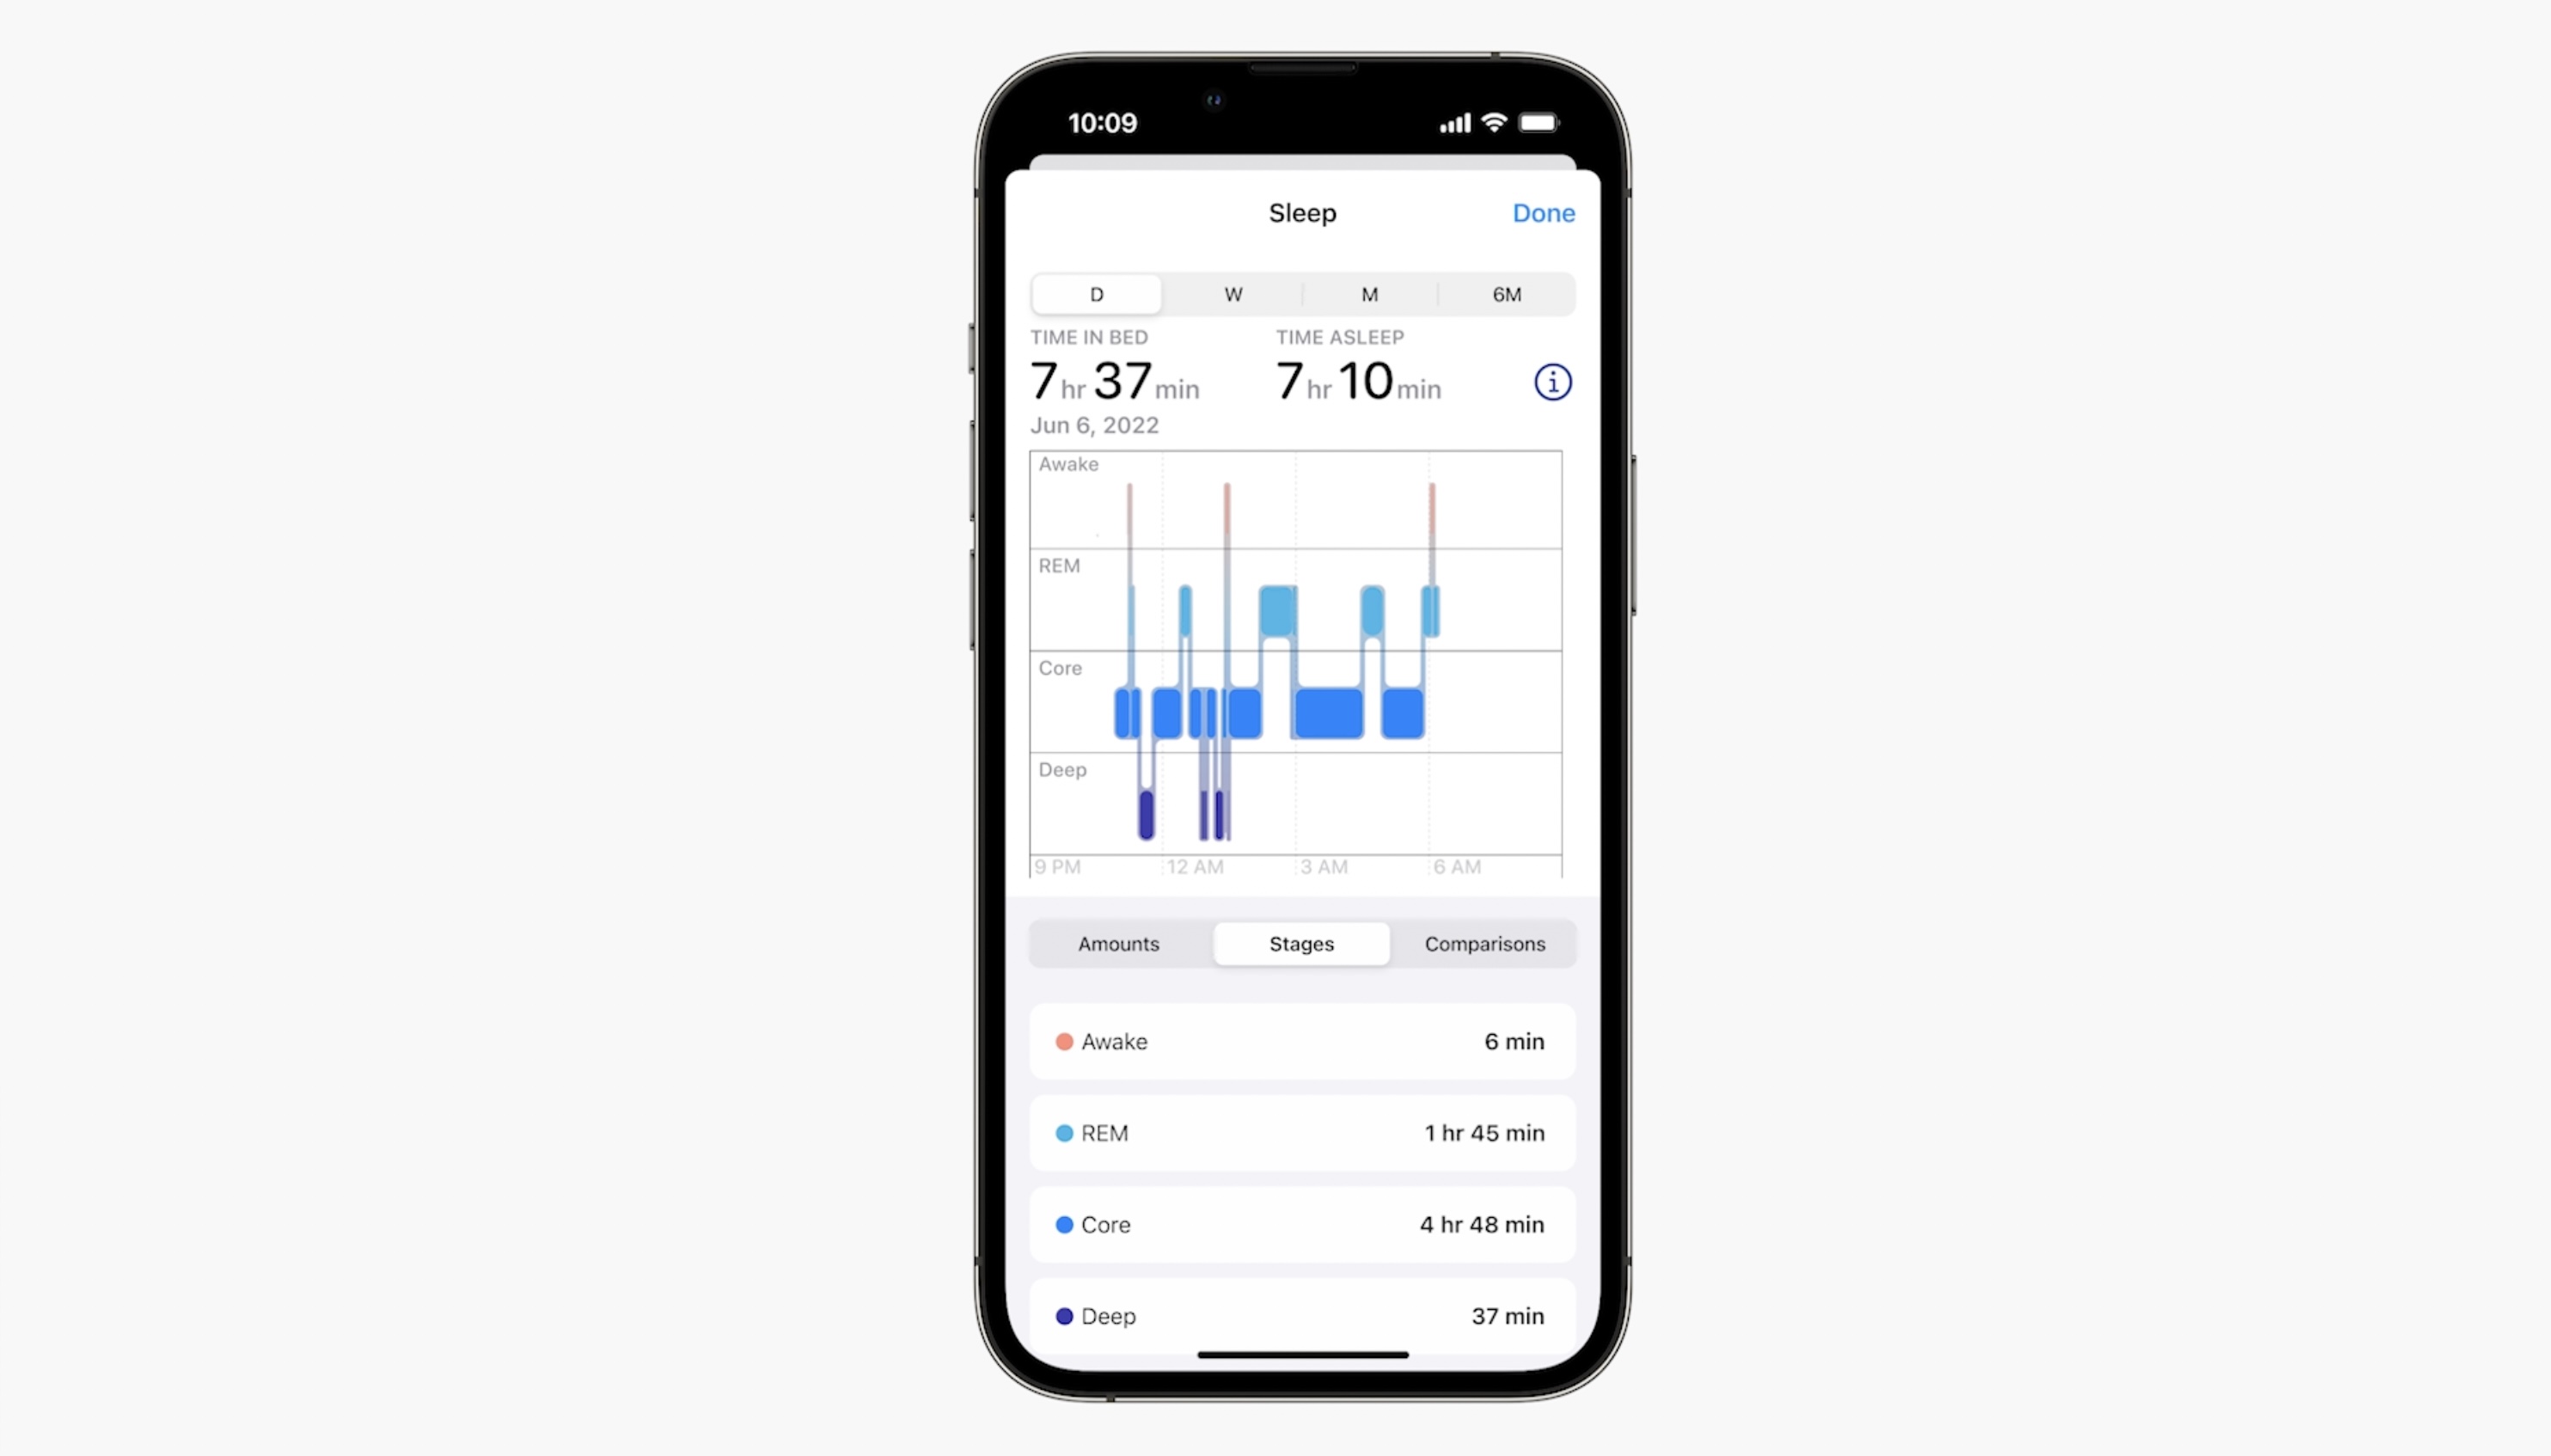 Sleep Stages in Apple Health on iPhone